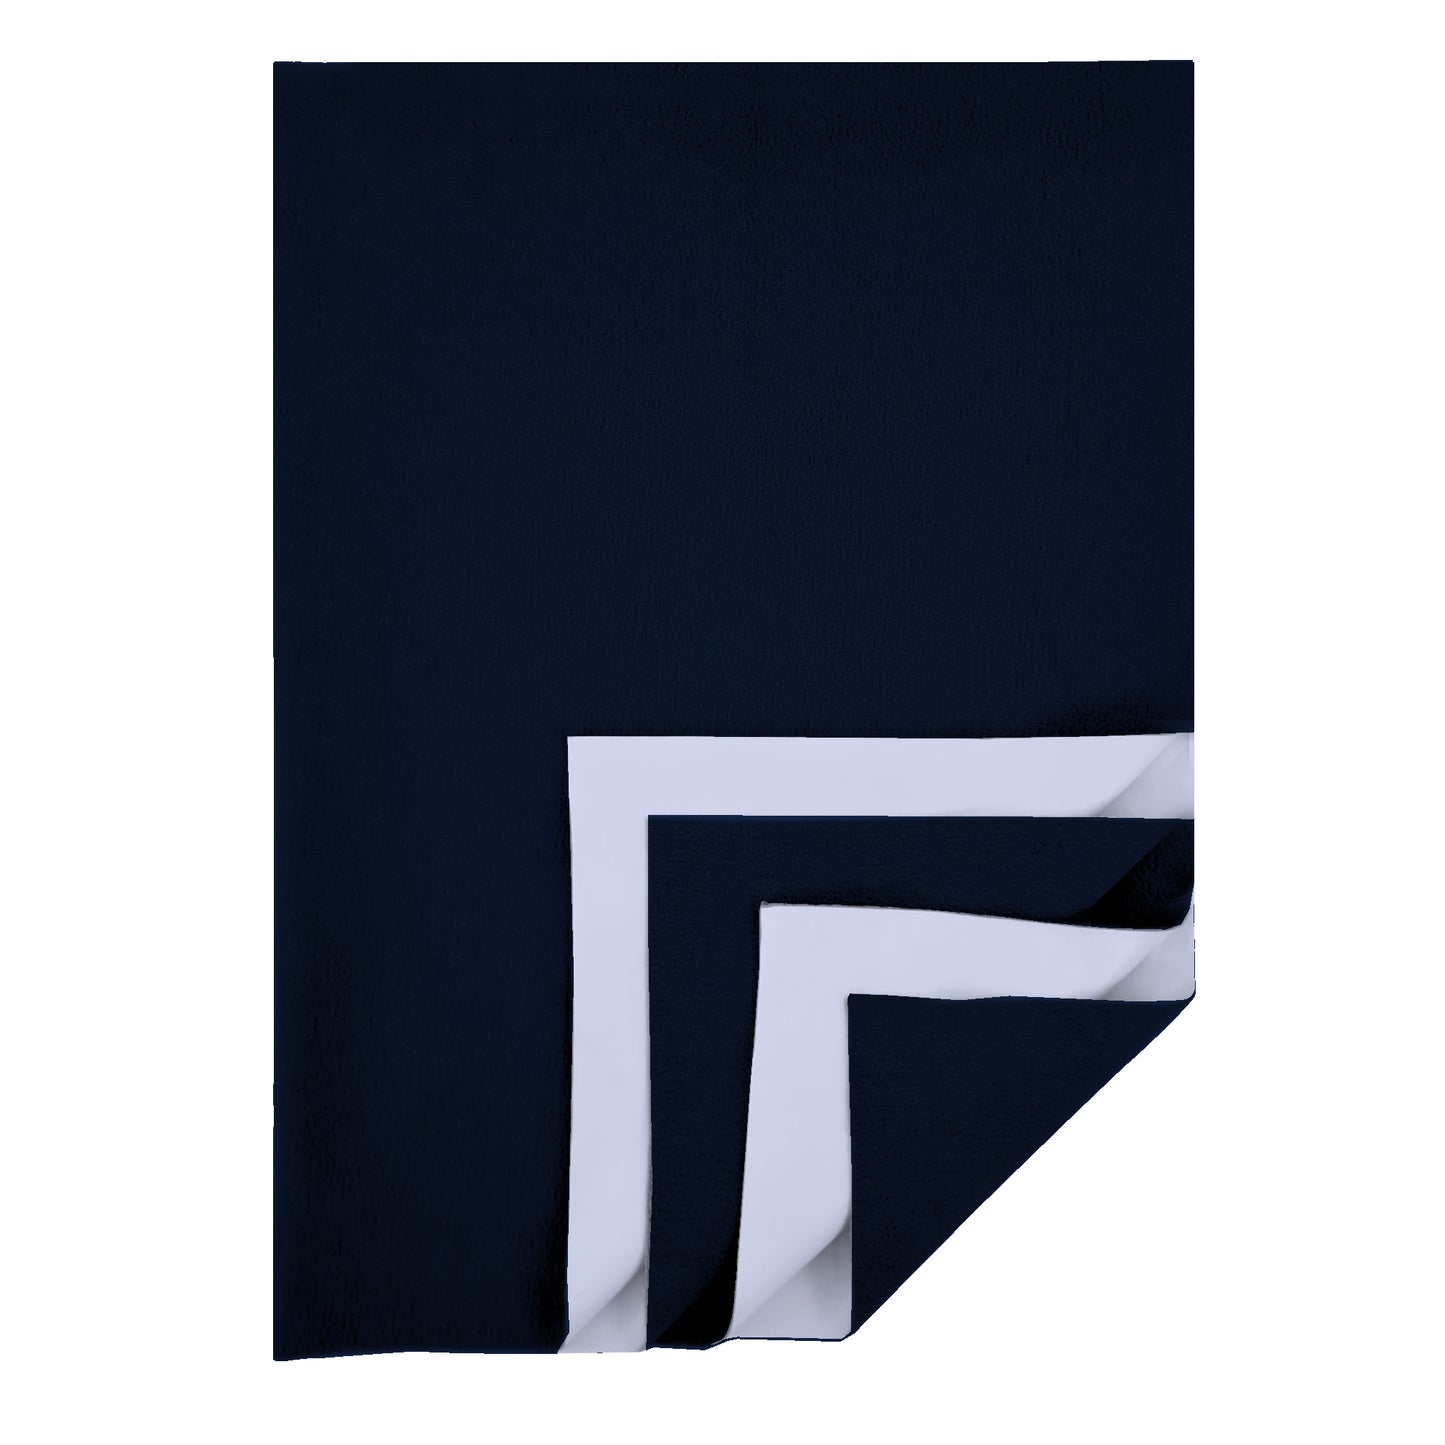 Waterproof Bed Protector, Quick Dry Sheet, Baby Bed Protector (70 X 100 CM), Pack of 1 -NAVY BLUE